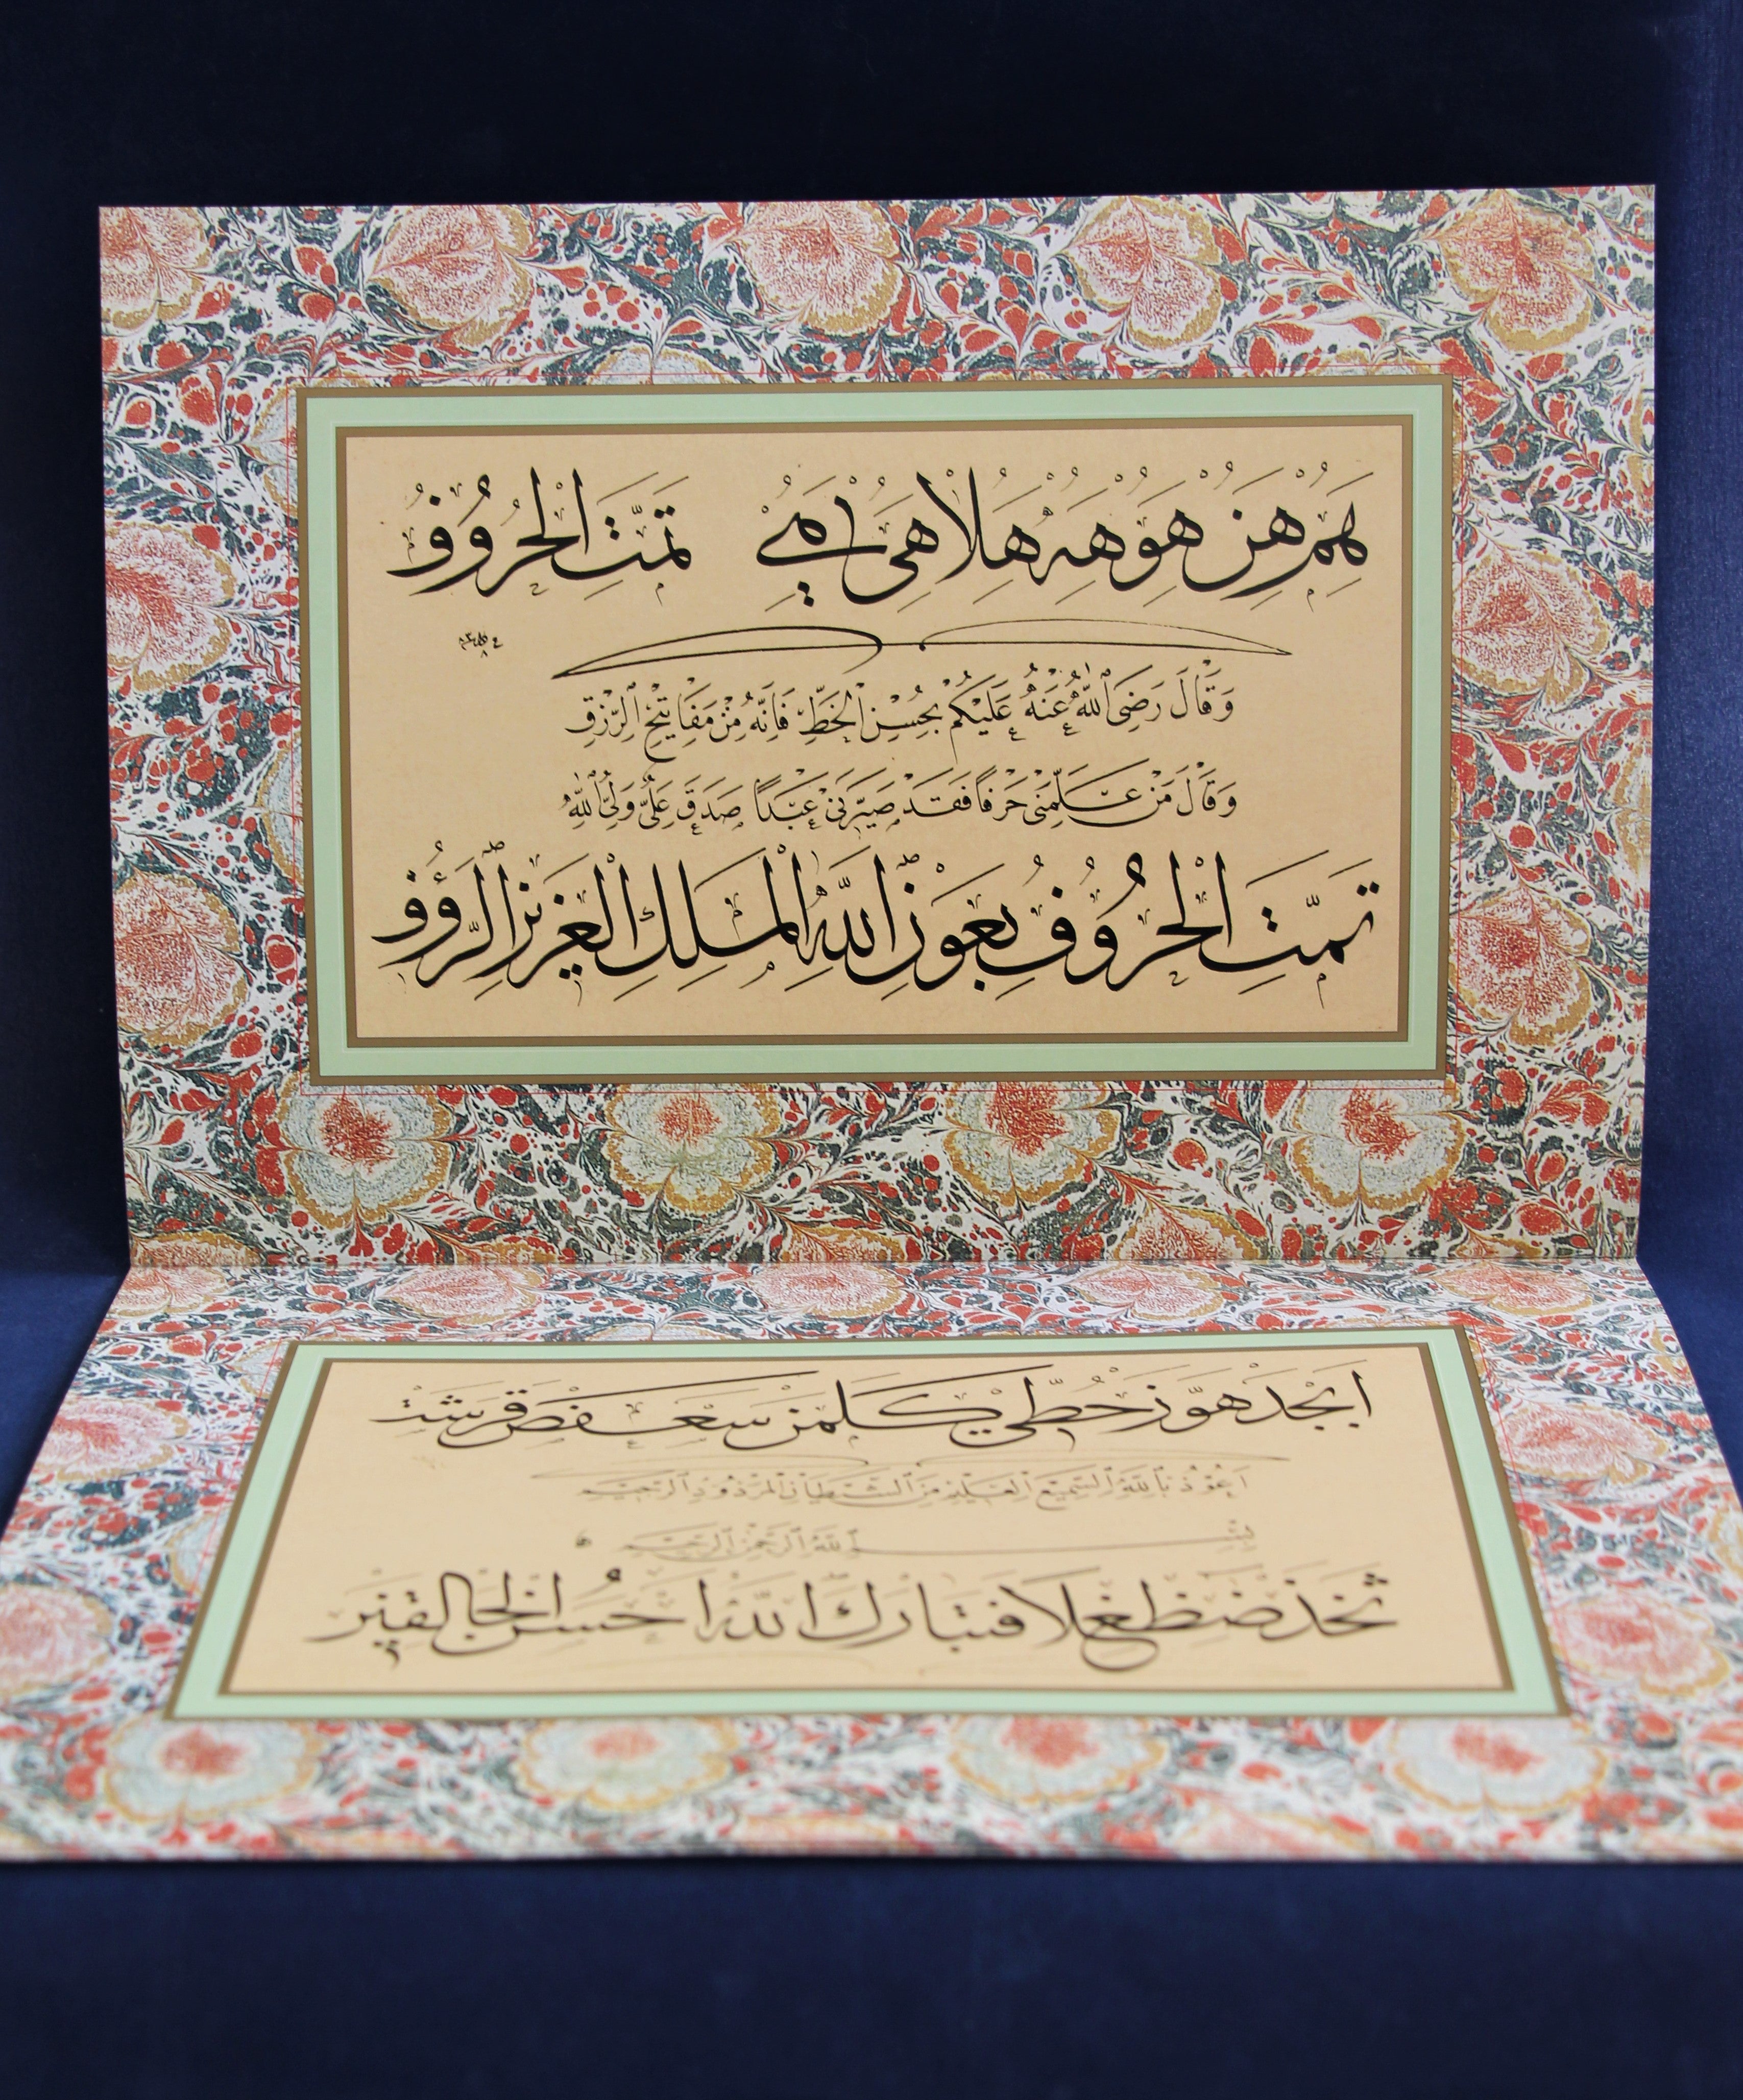 Copy book (mashq) for Thuluth and Naskh scripts - based on work of Mehmed Sevki Efendi